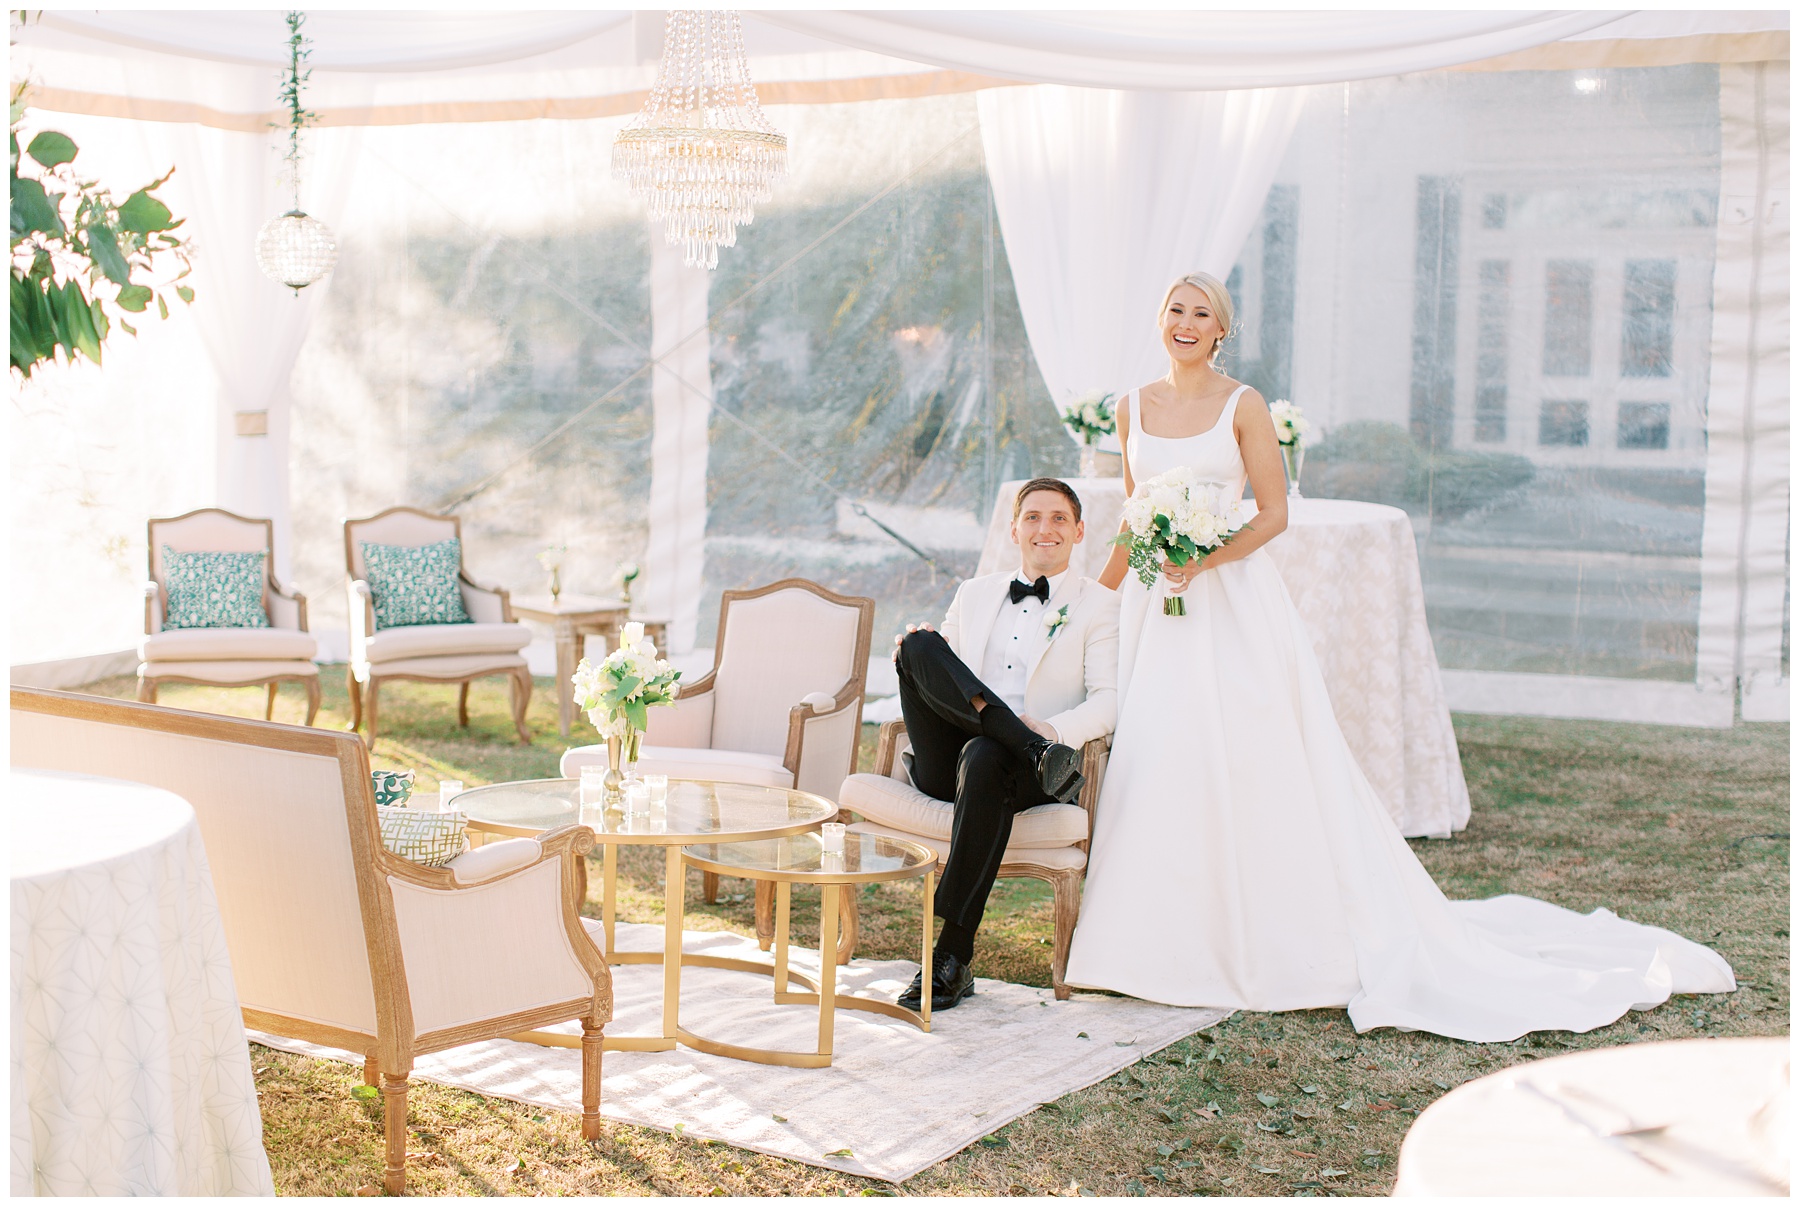 groom in white tux jacket sits in chair in tent with bride standing next to him